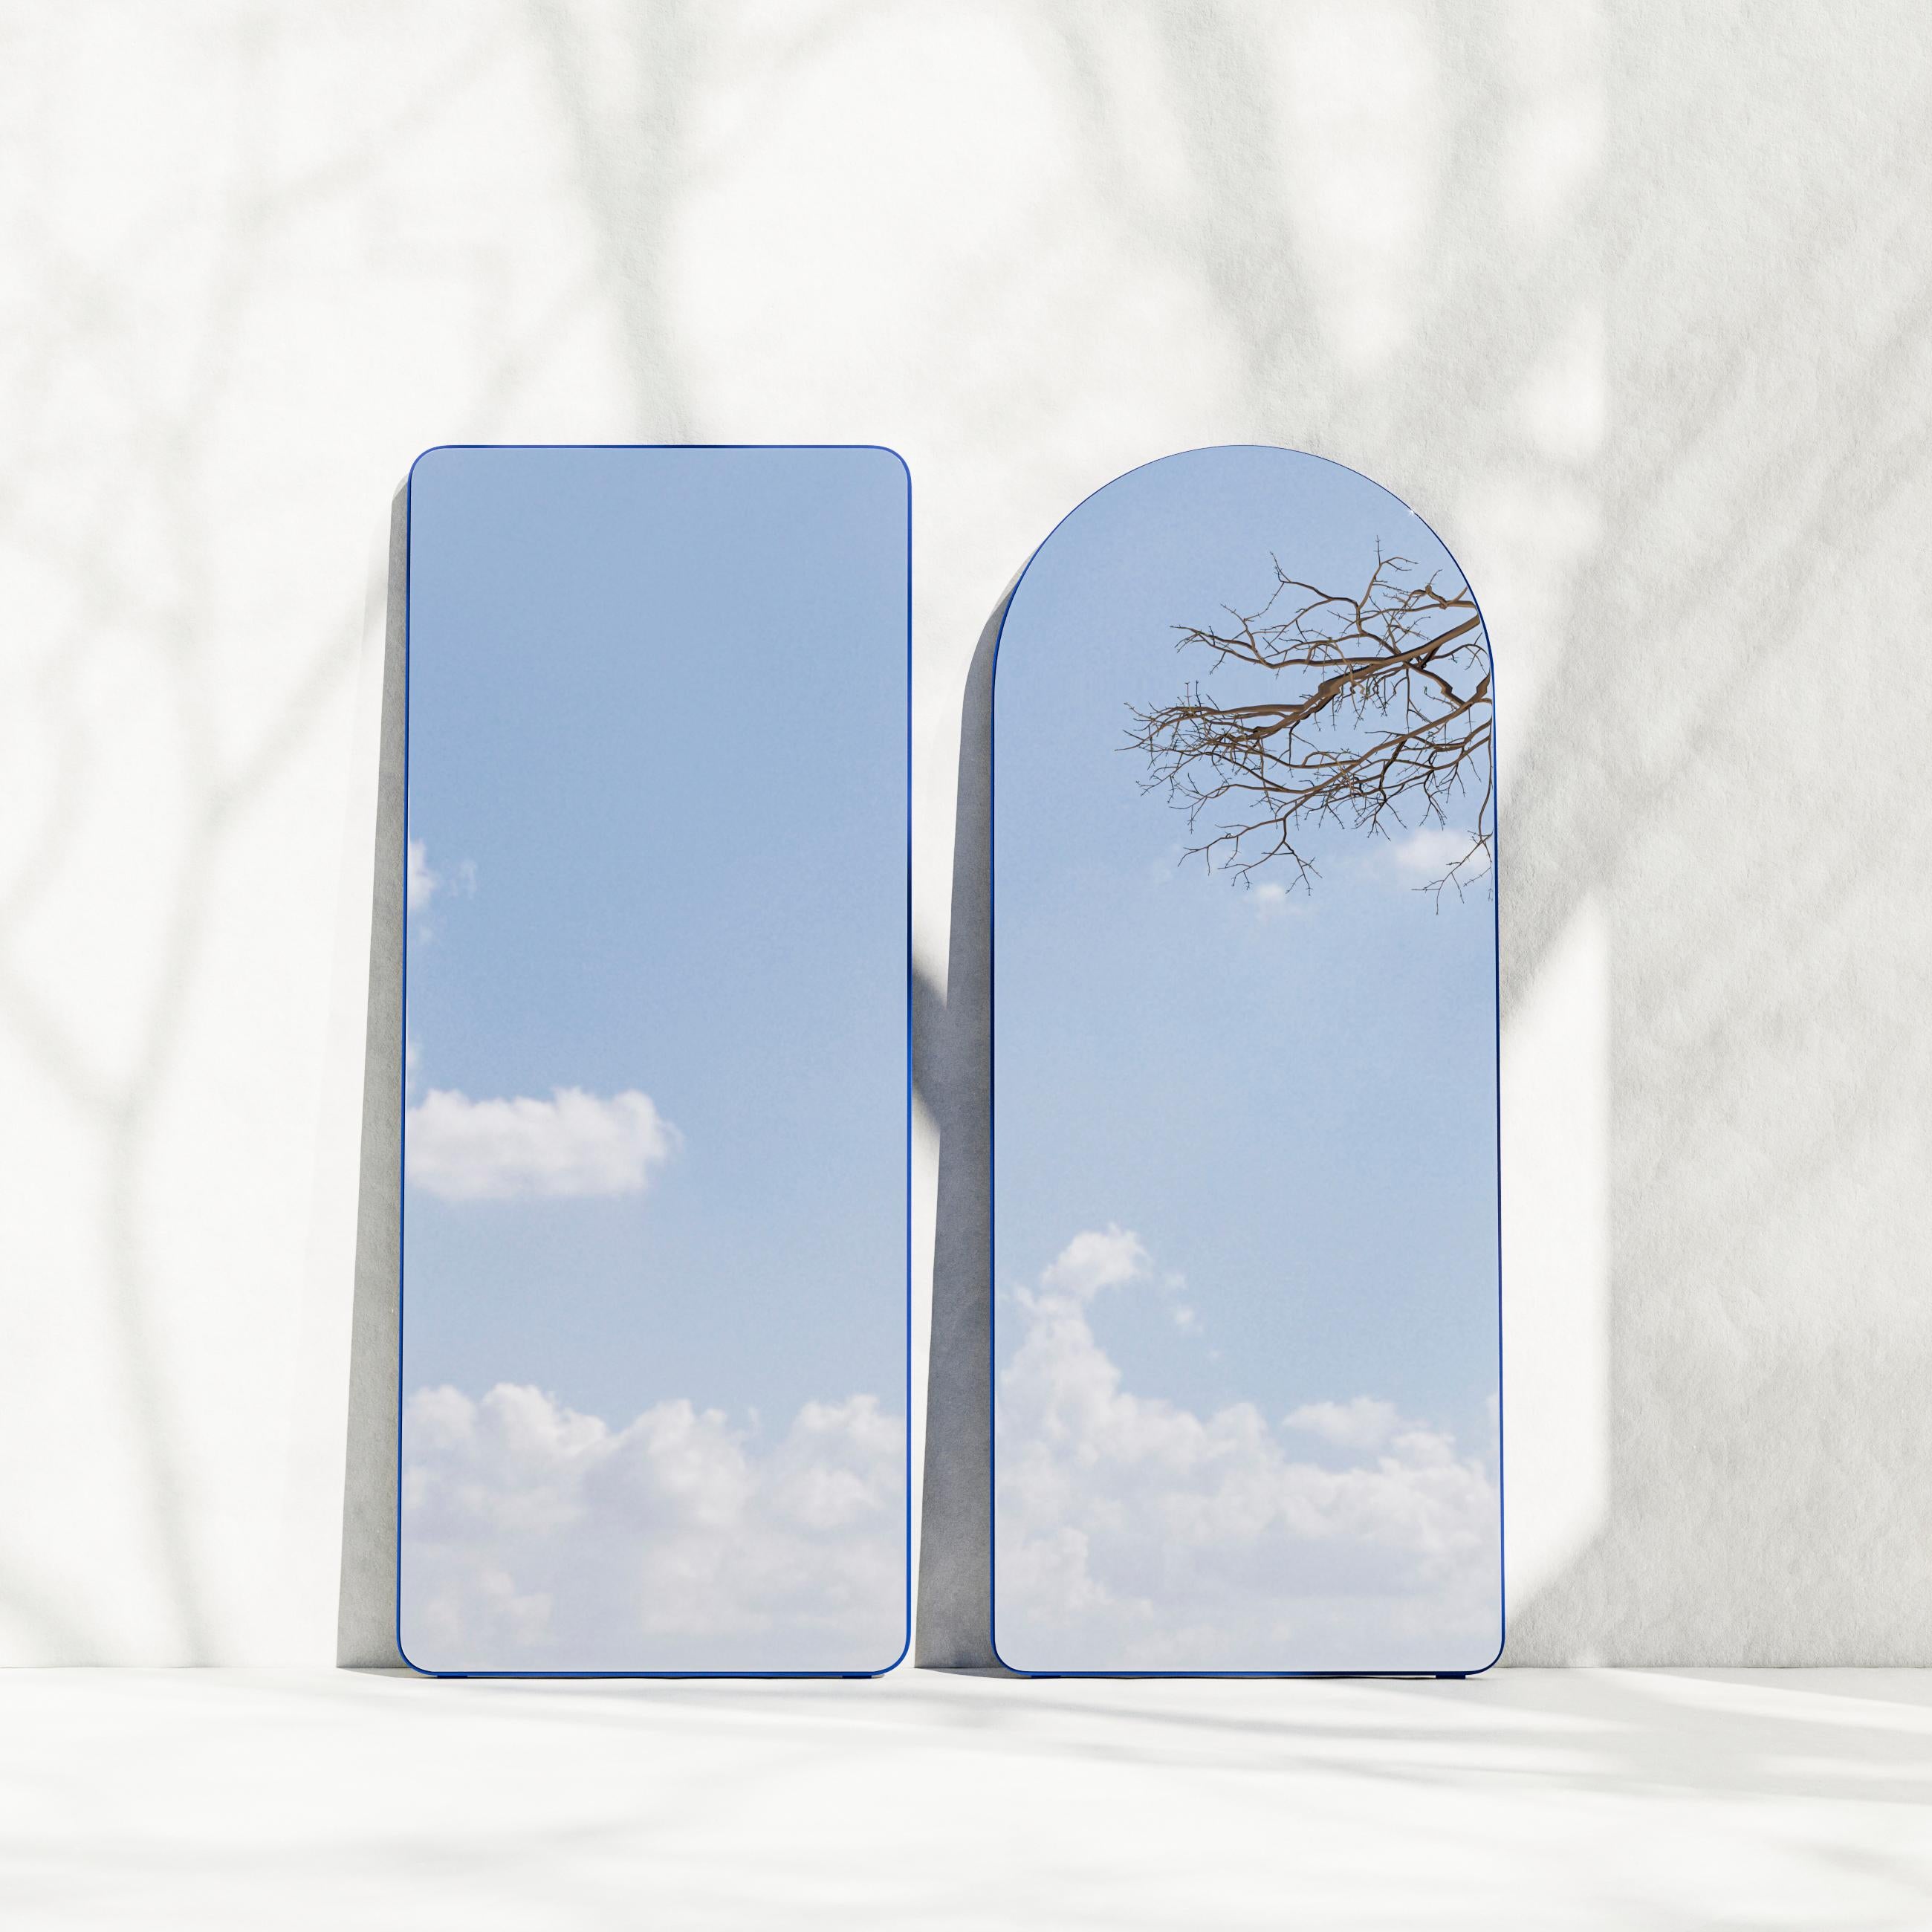 Contemporary mirror 'Loveself 05' by Oitoproducts

Dimensions:
W 70 cm x H 180 cm x D 4 cm
W 27.5 in x H 71 in x D 1.3 in

Materials: Painted ecological water paint MDF, silver glass mirror, special rubber feet.

About
LOVESELF is a